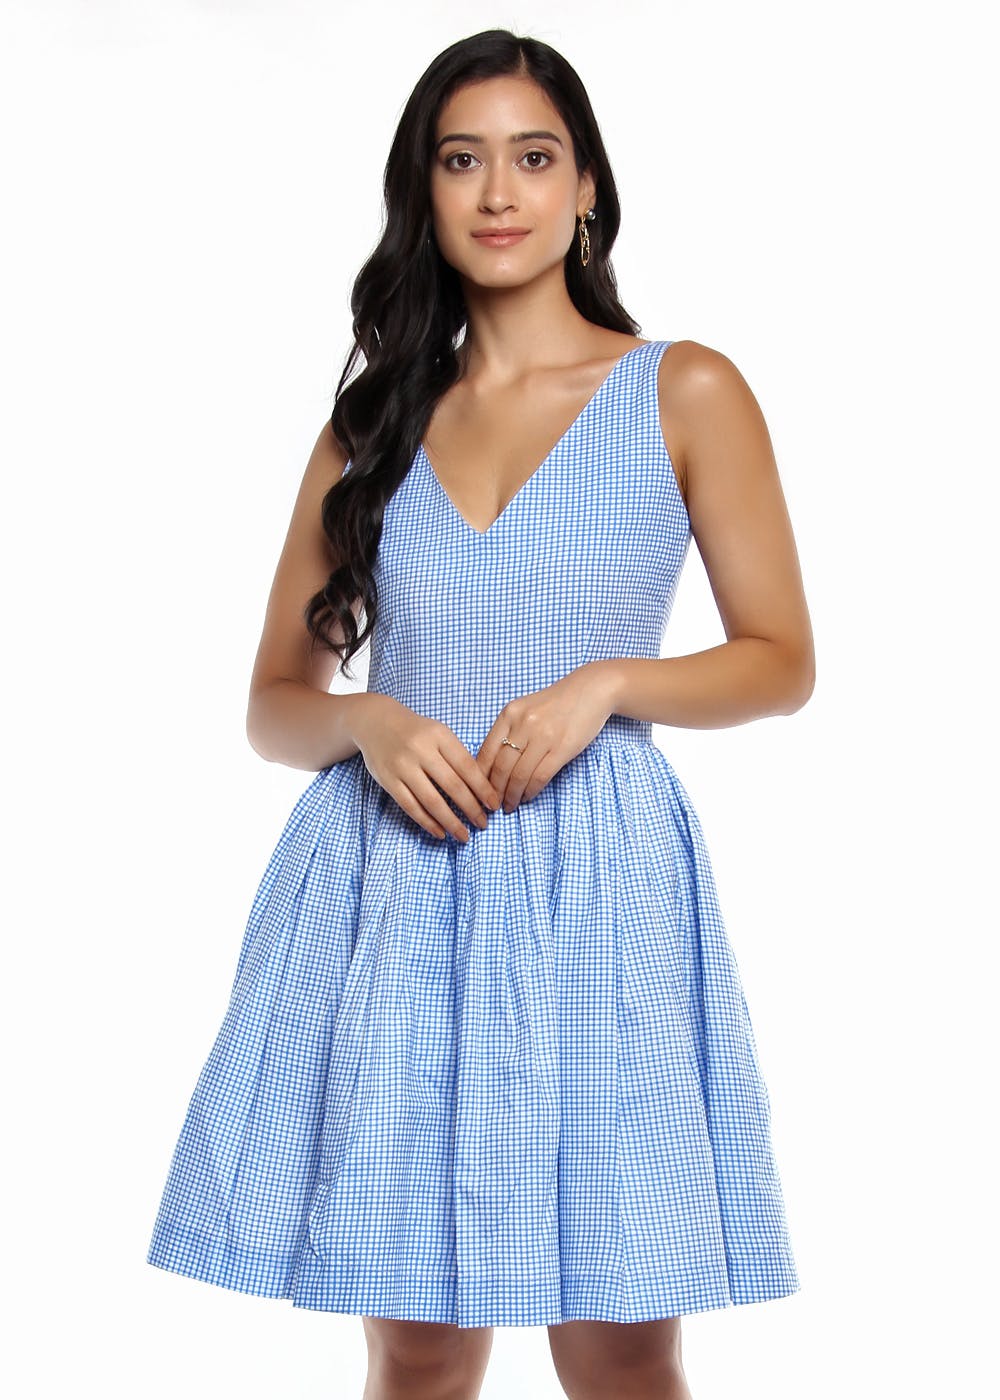 Get Blue & White Checkered Box Pleated Dress at ₹ 1850 | LBB Shop